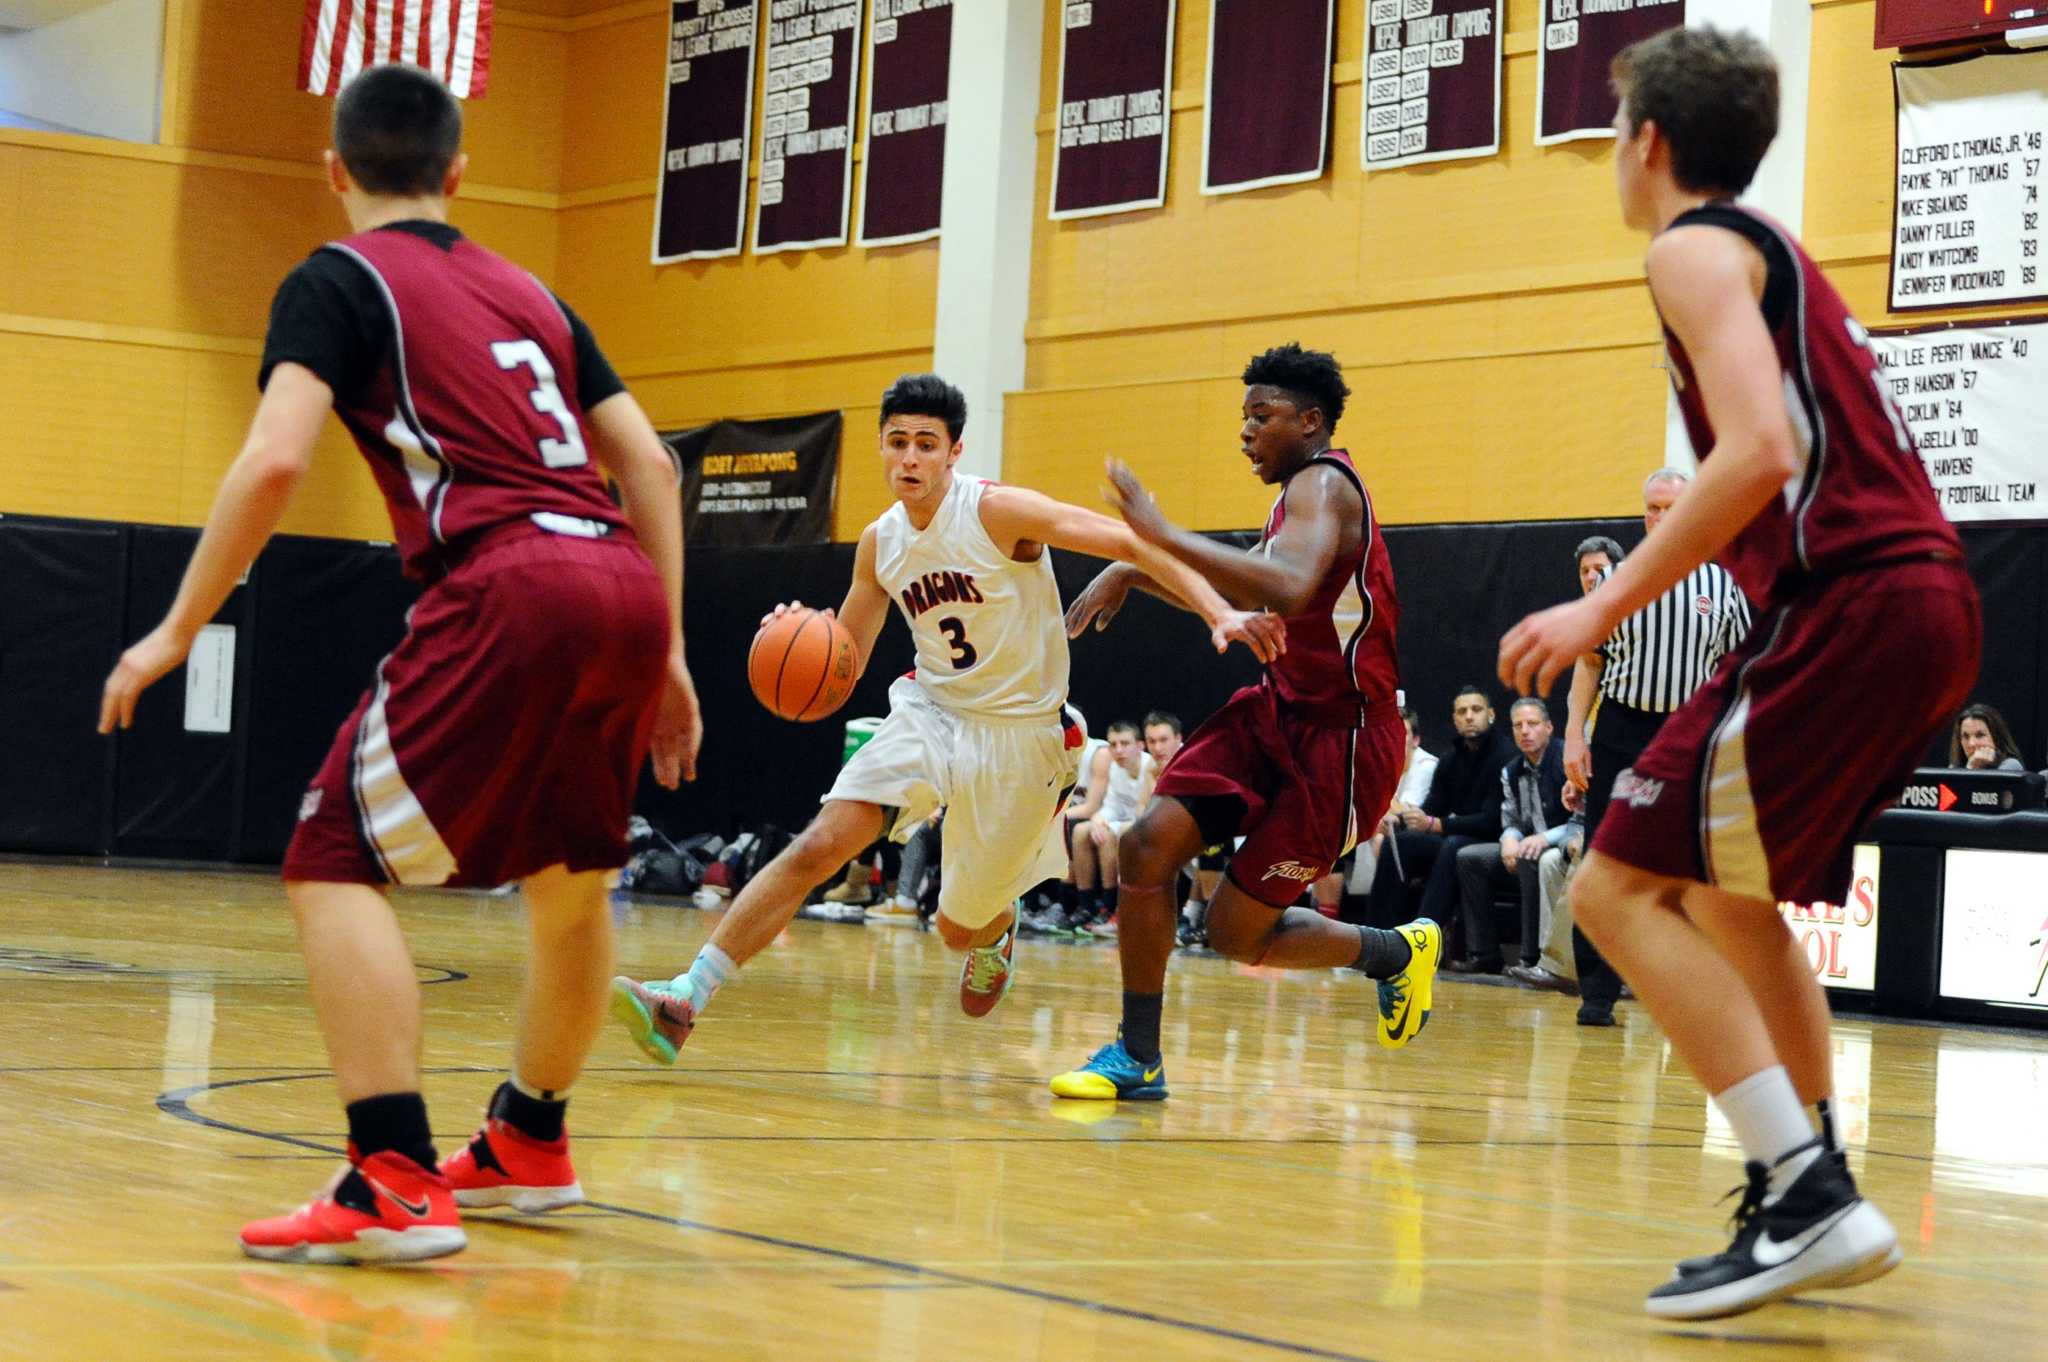 St. Luke’s pulls away from Greens Farms in FAA semifinals